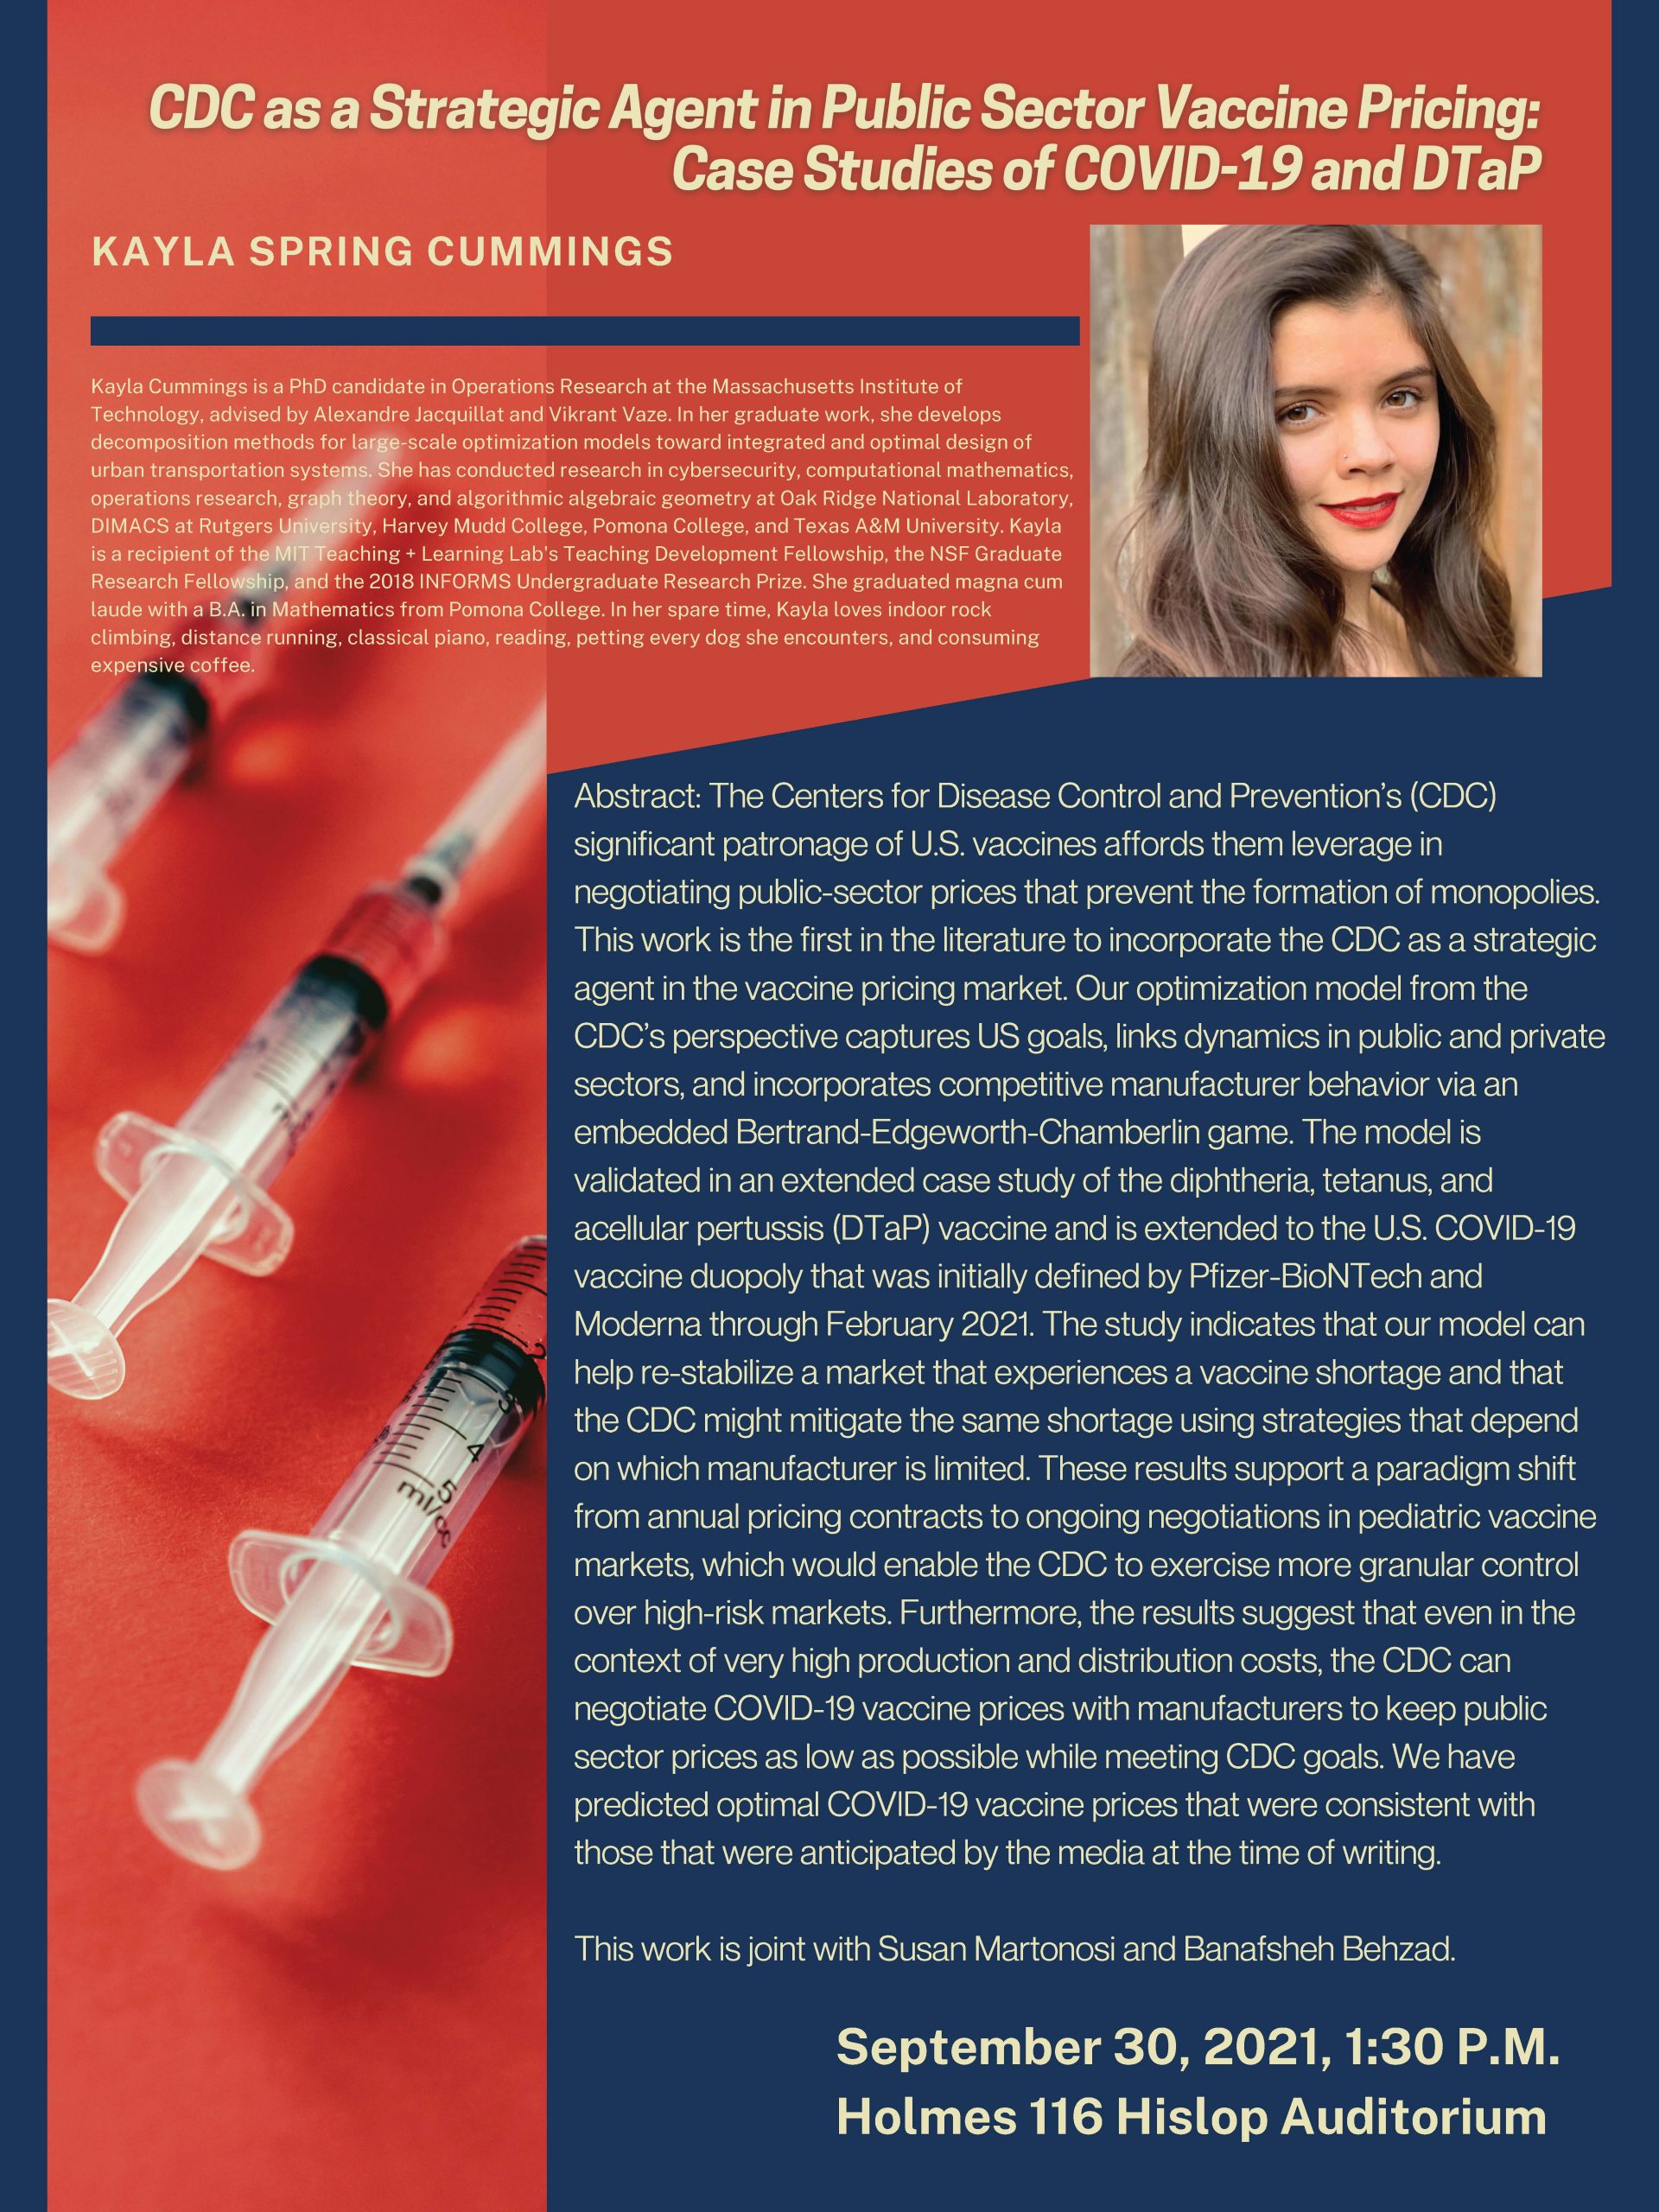 Kayla Cummings to present ‘CDC as a Strategic Agent in Public Sector Vaccine Pricing’